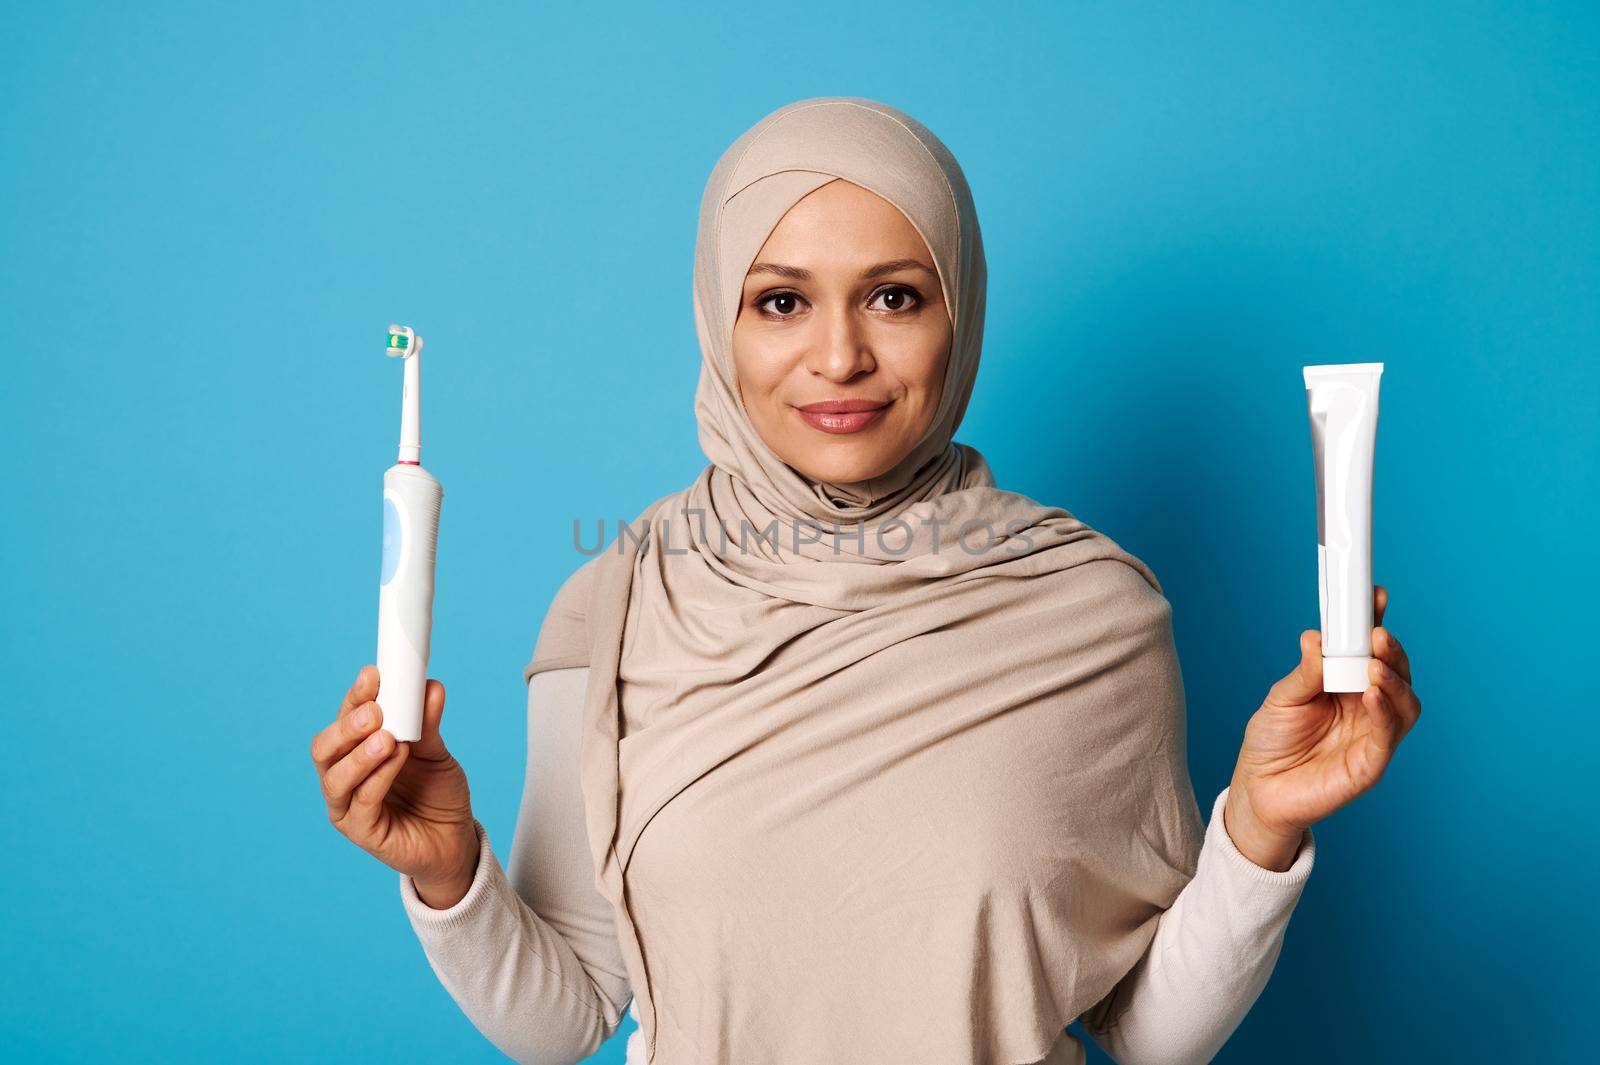 Beautiful woman with oriental appearance in hijab, holding a toothpaste and toothbrush, posing looking at camera over blue background by artgf